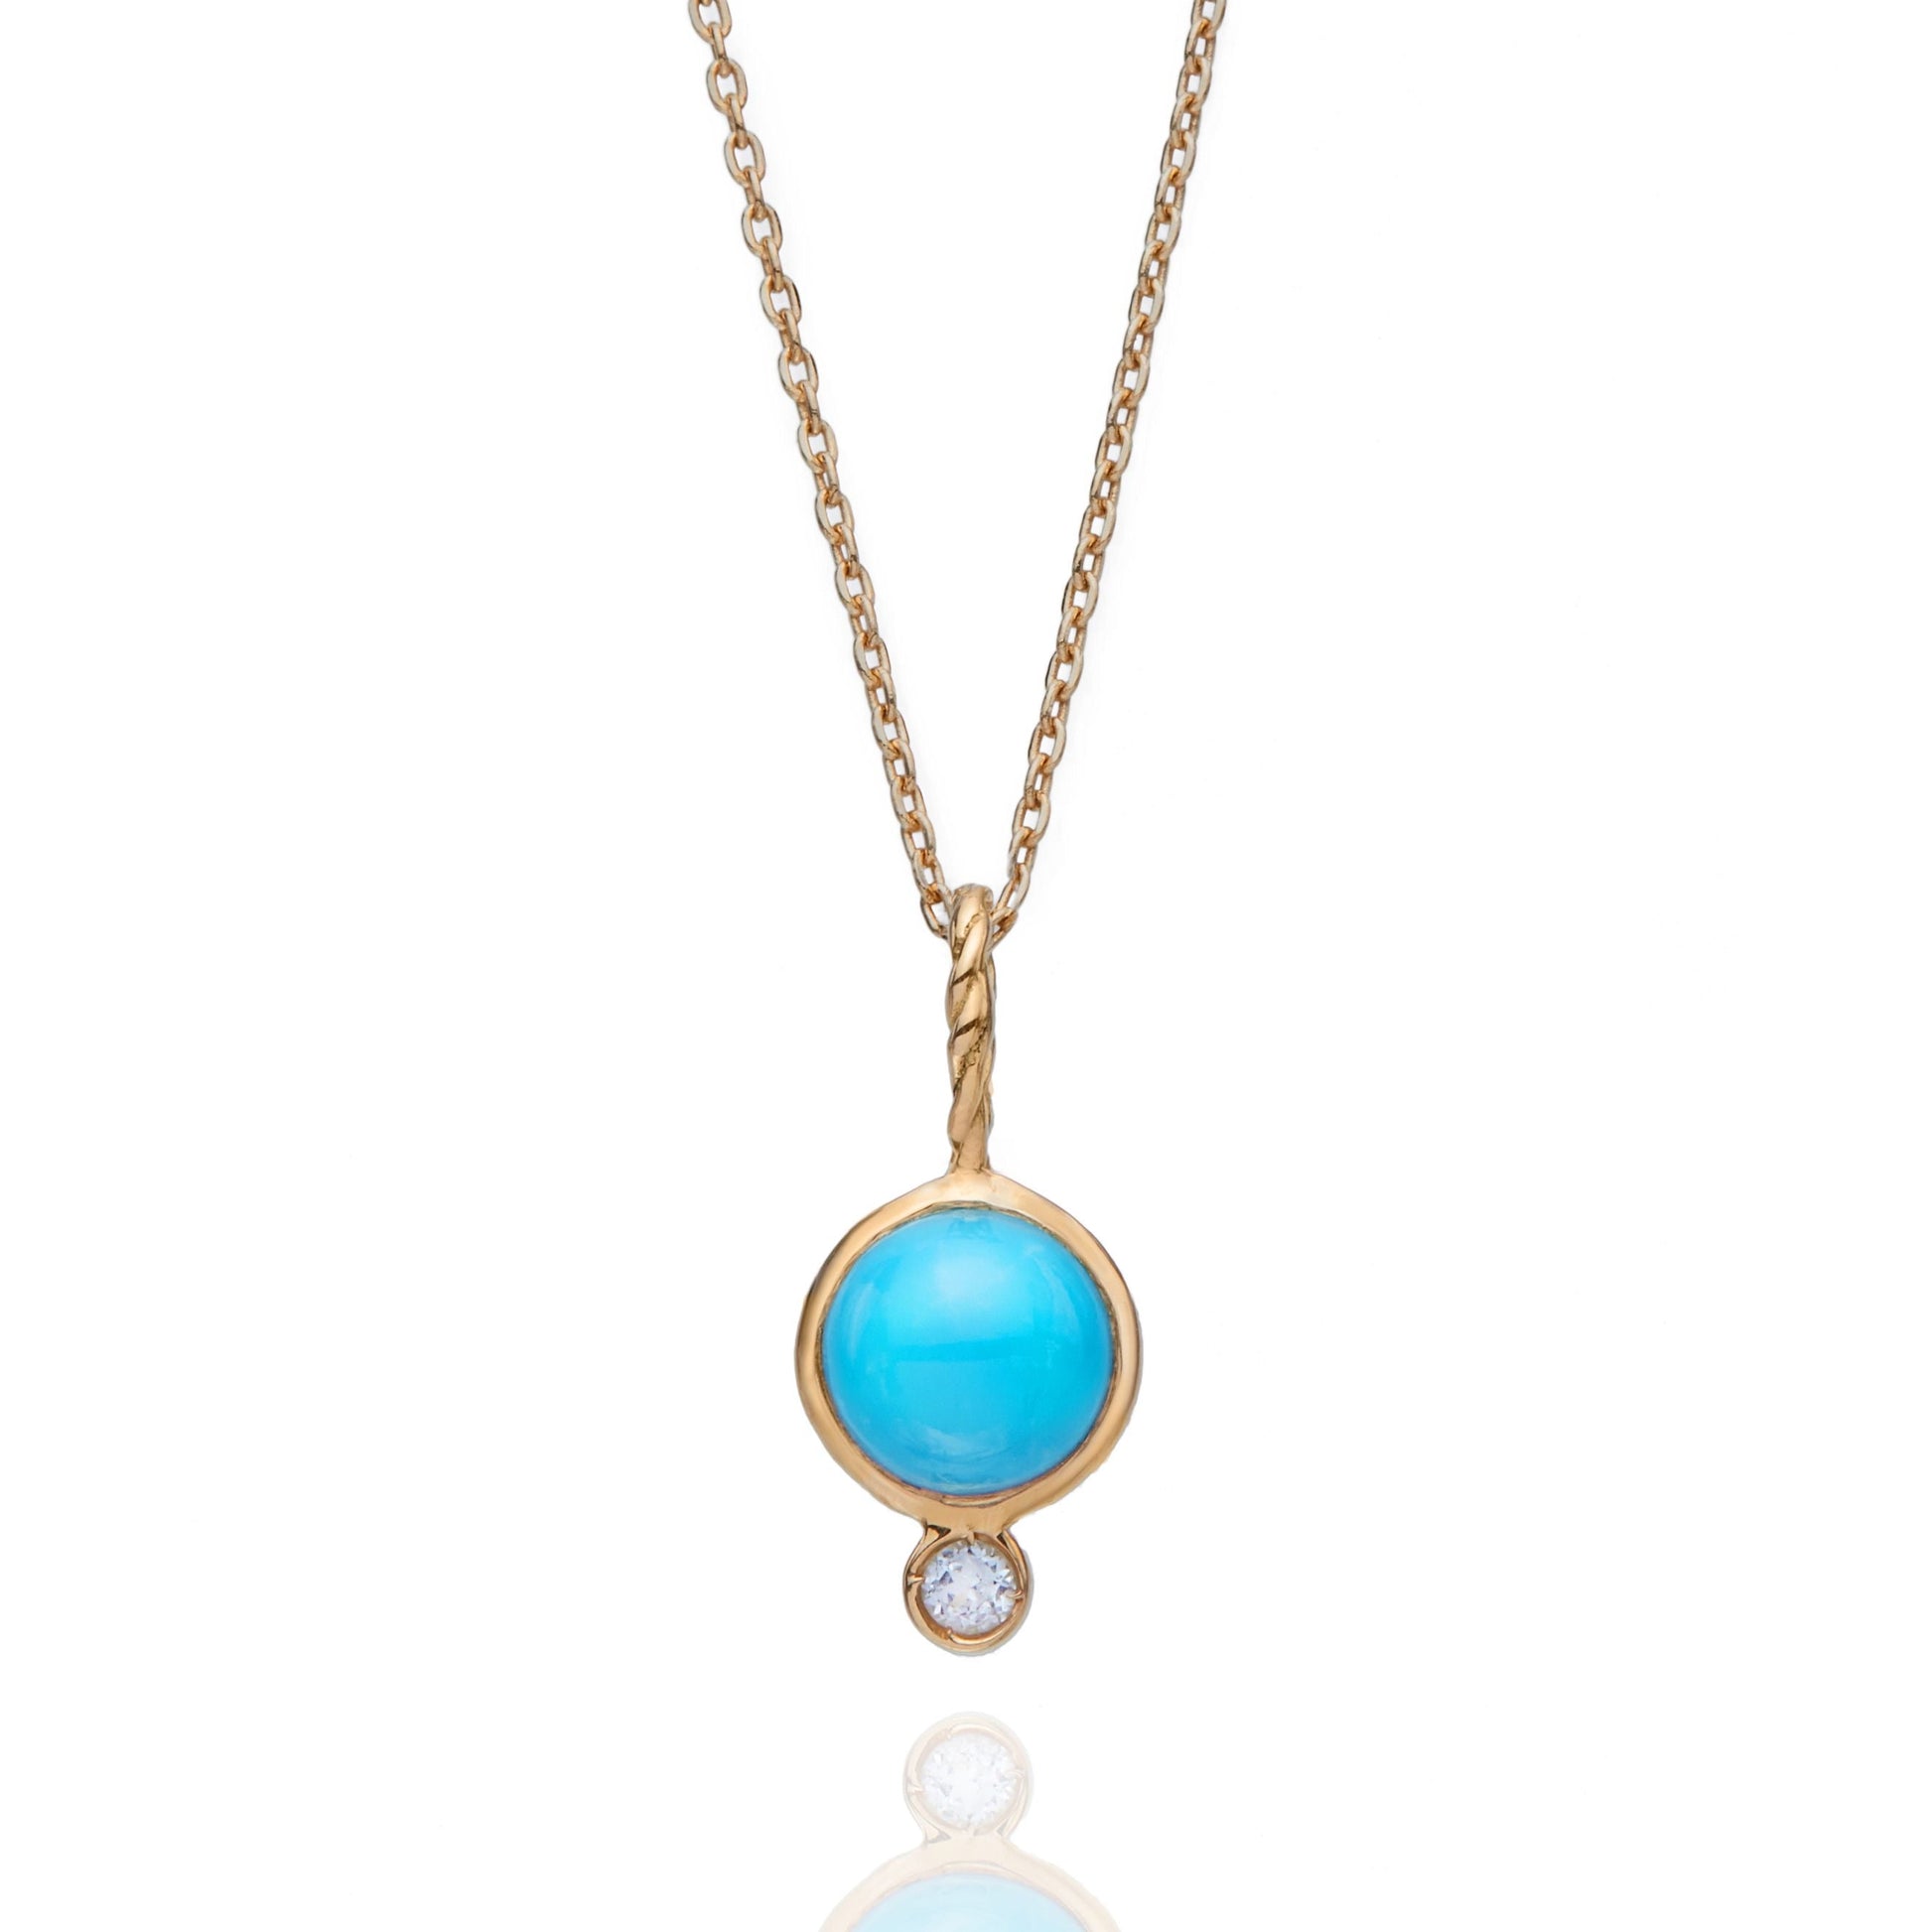 Sleeping Beauty Turquoise Cabochon Necklace – Sorrel Sky Gallery